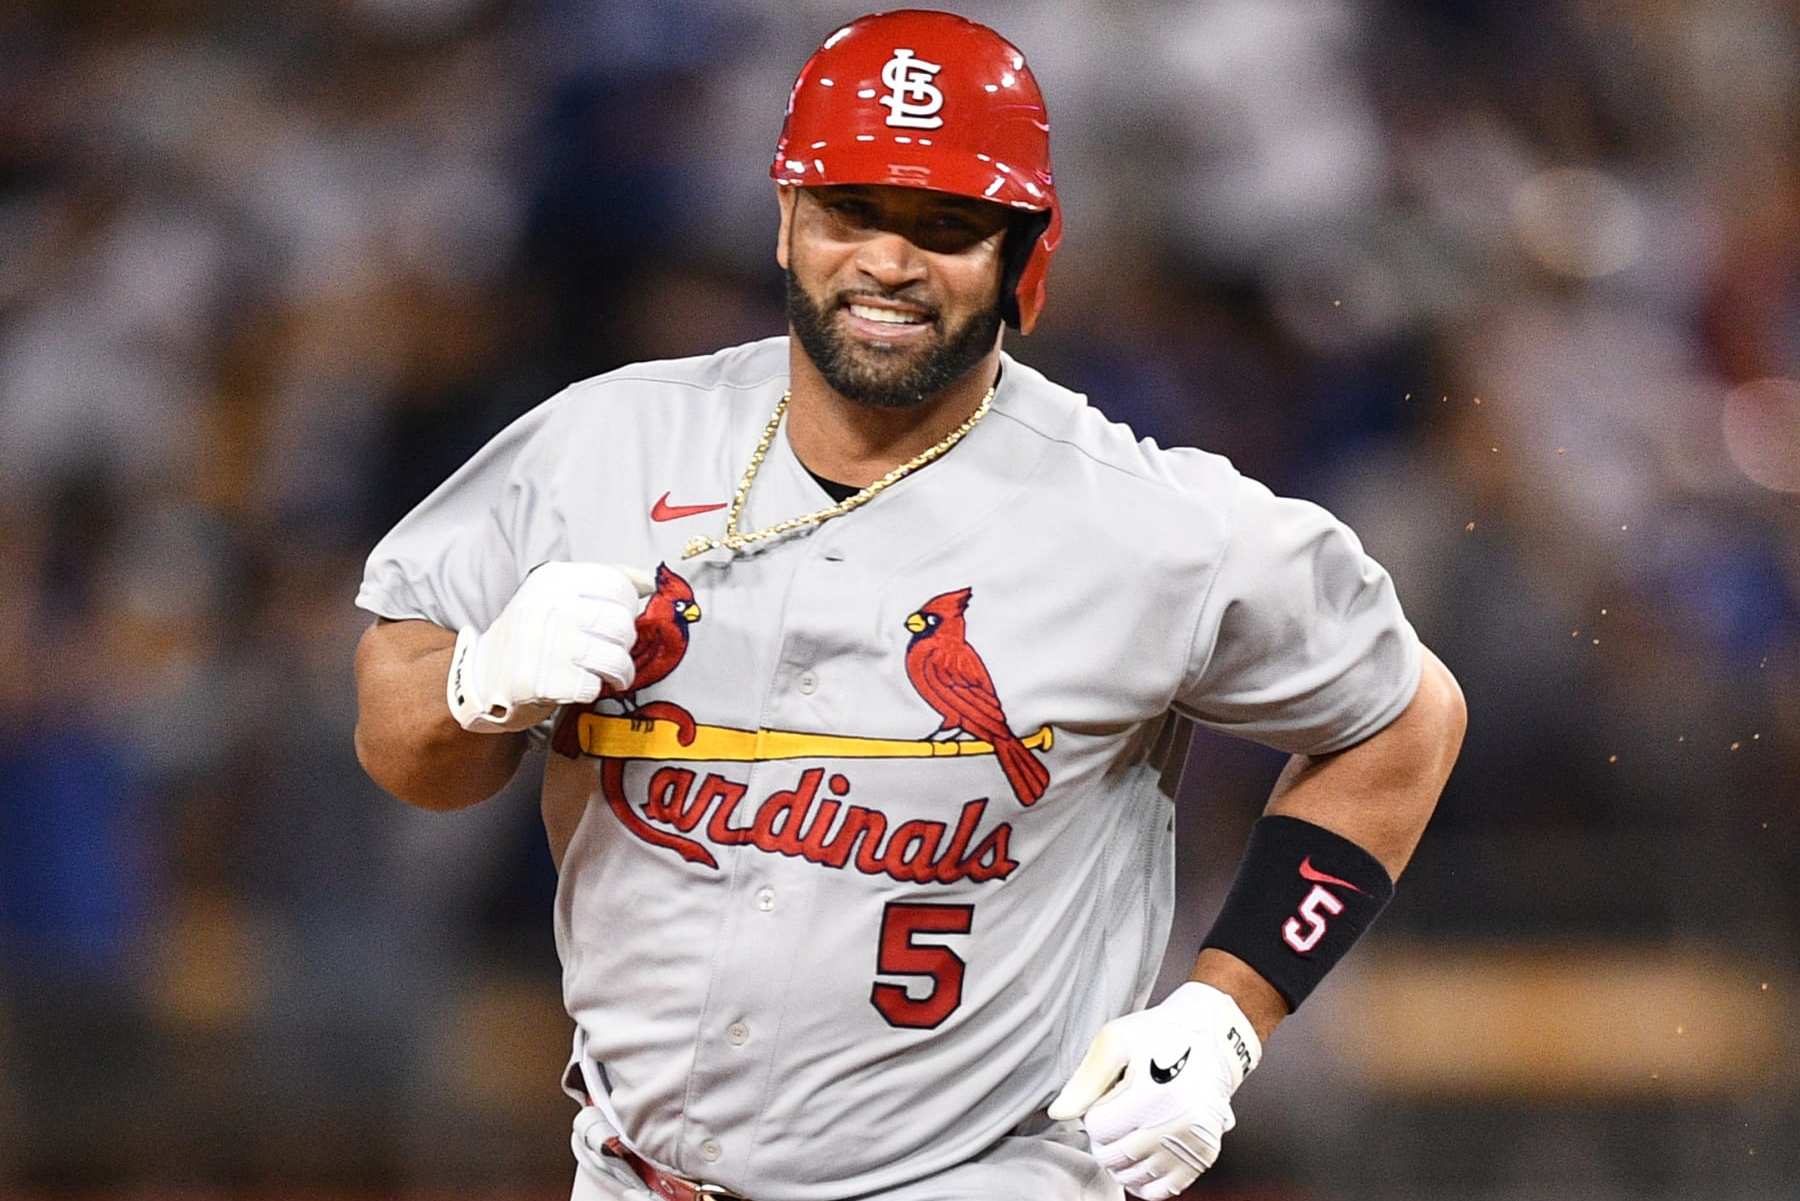 St. Louis Cardinals' Albert Pujols joins 700 club with two-homer day - ESPN